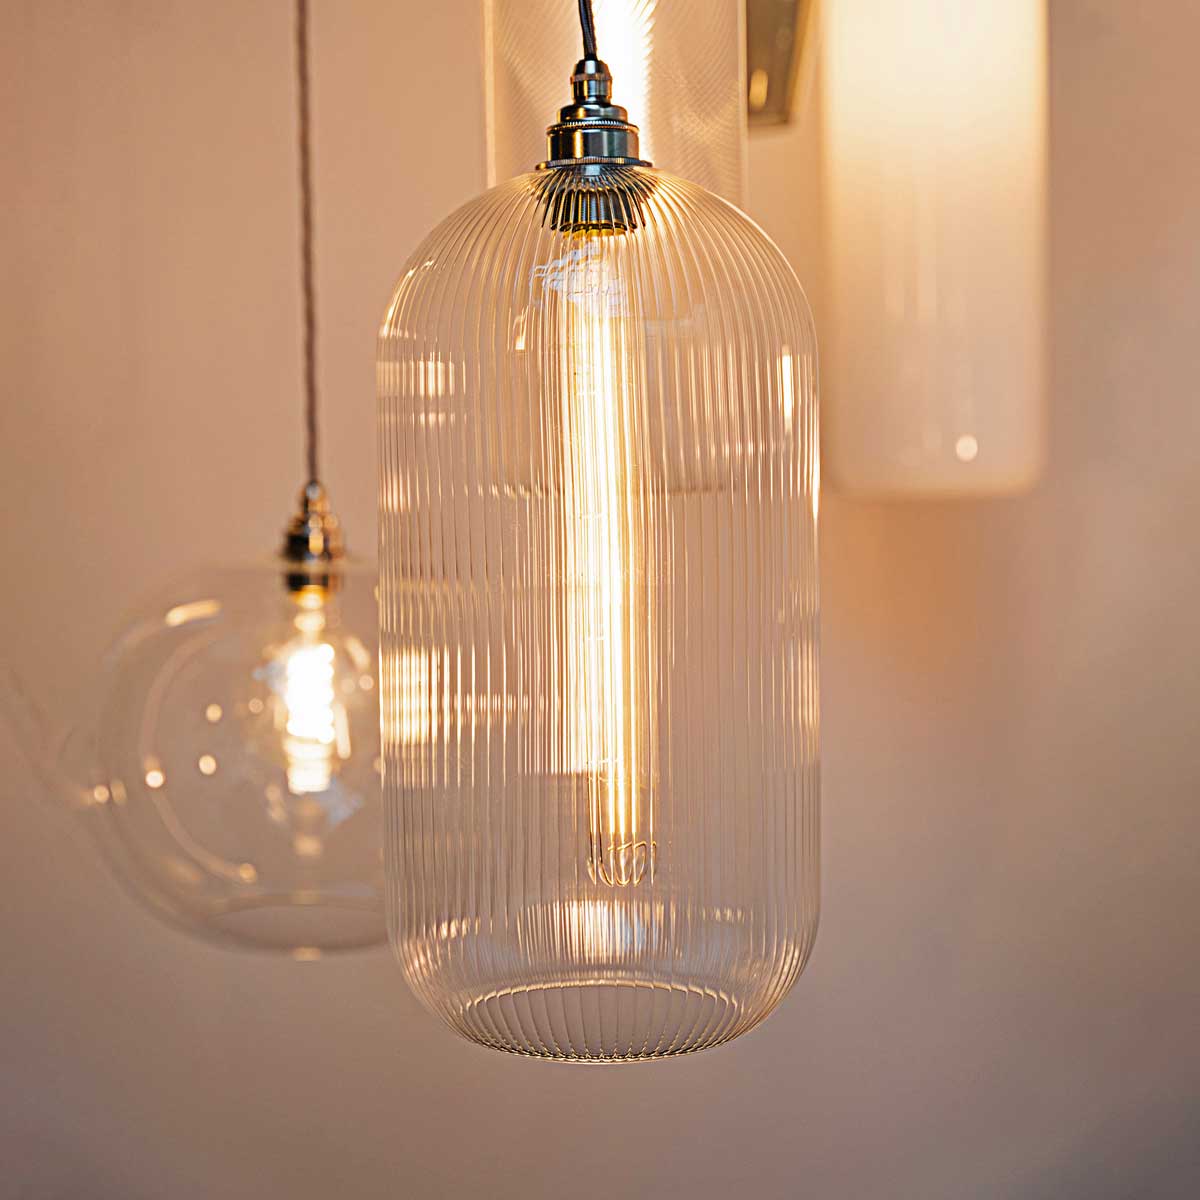 Leverint made Charlton Pendant Light in size Medium which is sold by South Charlotte Fine Lighting